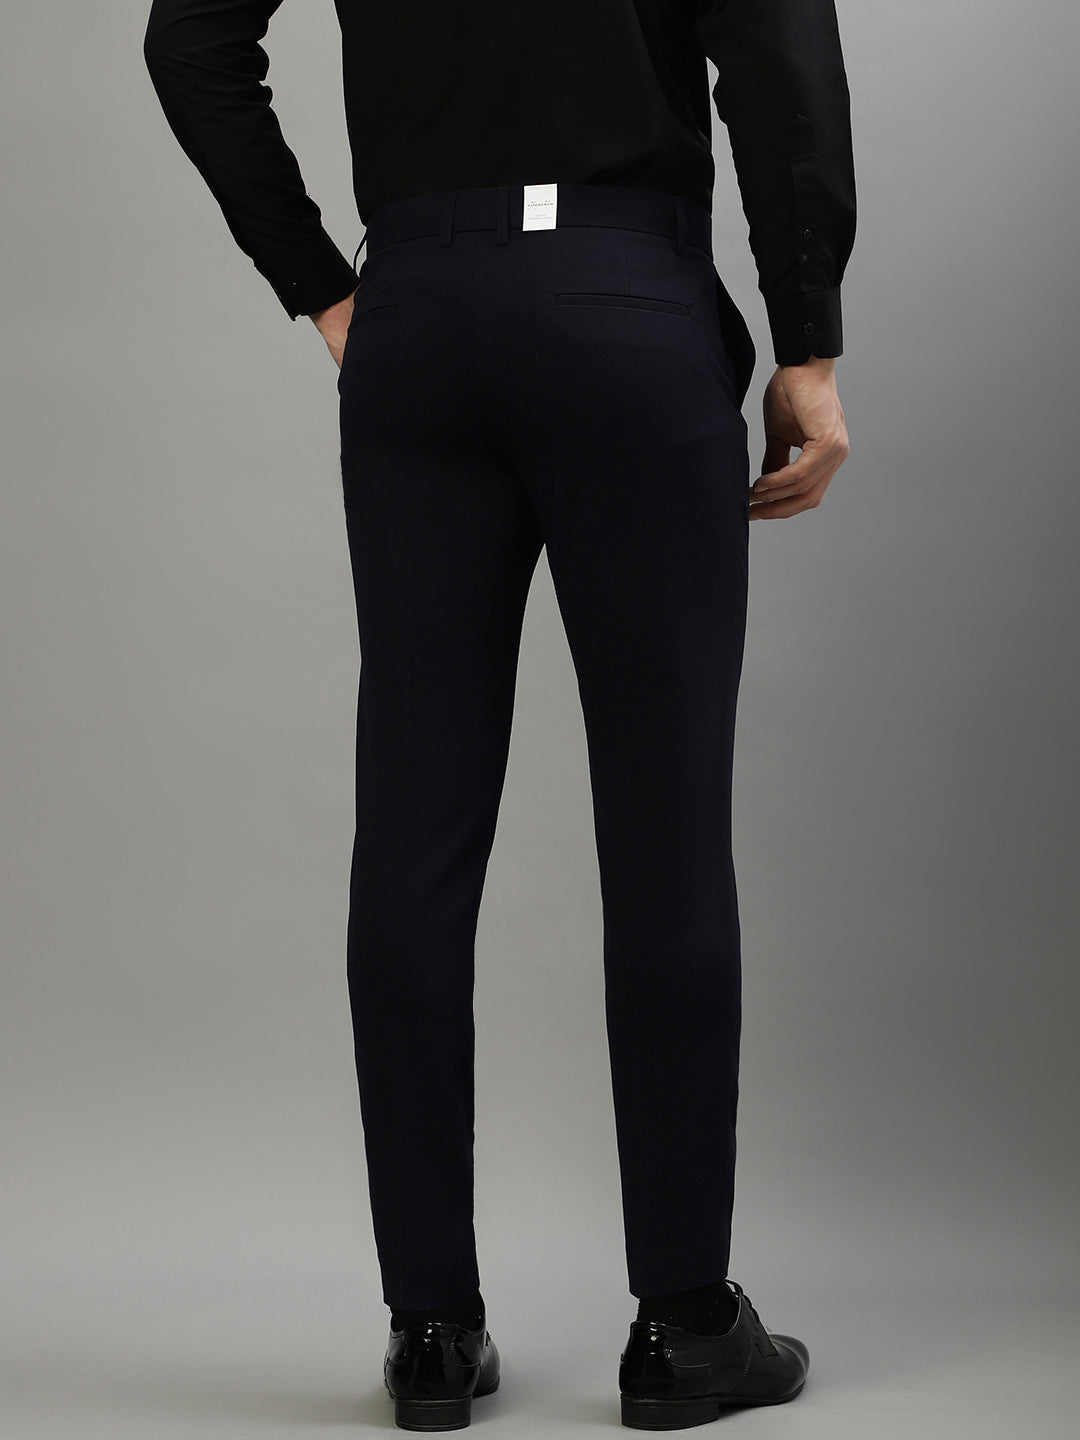 DKNY Slim Fit Black Trousers | Buy Online at Moss